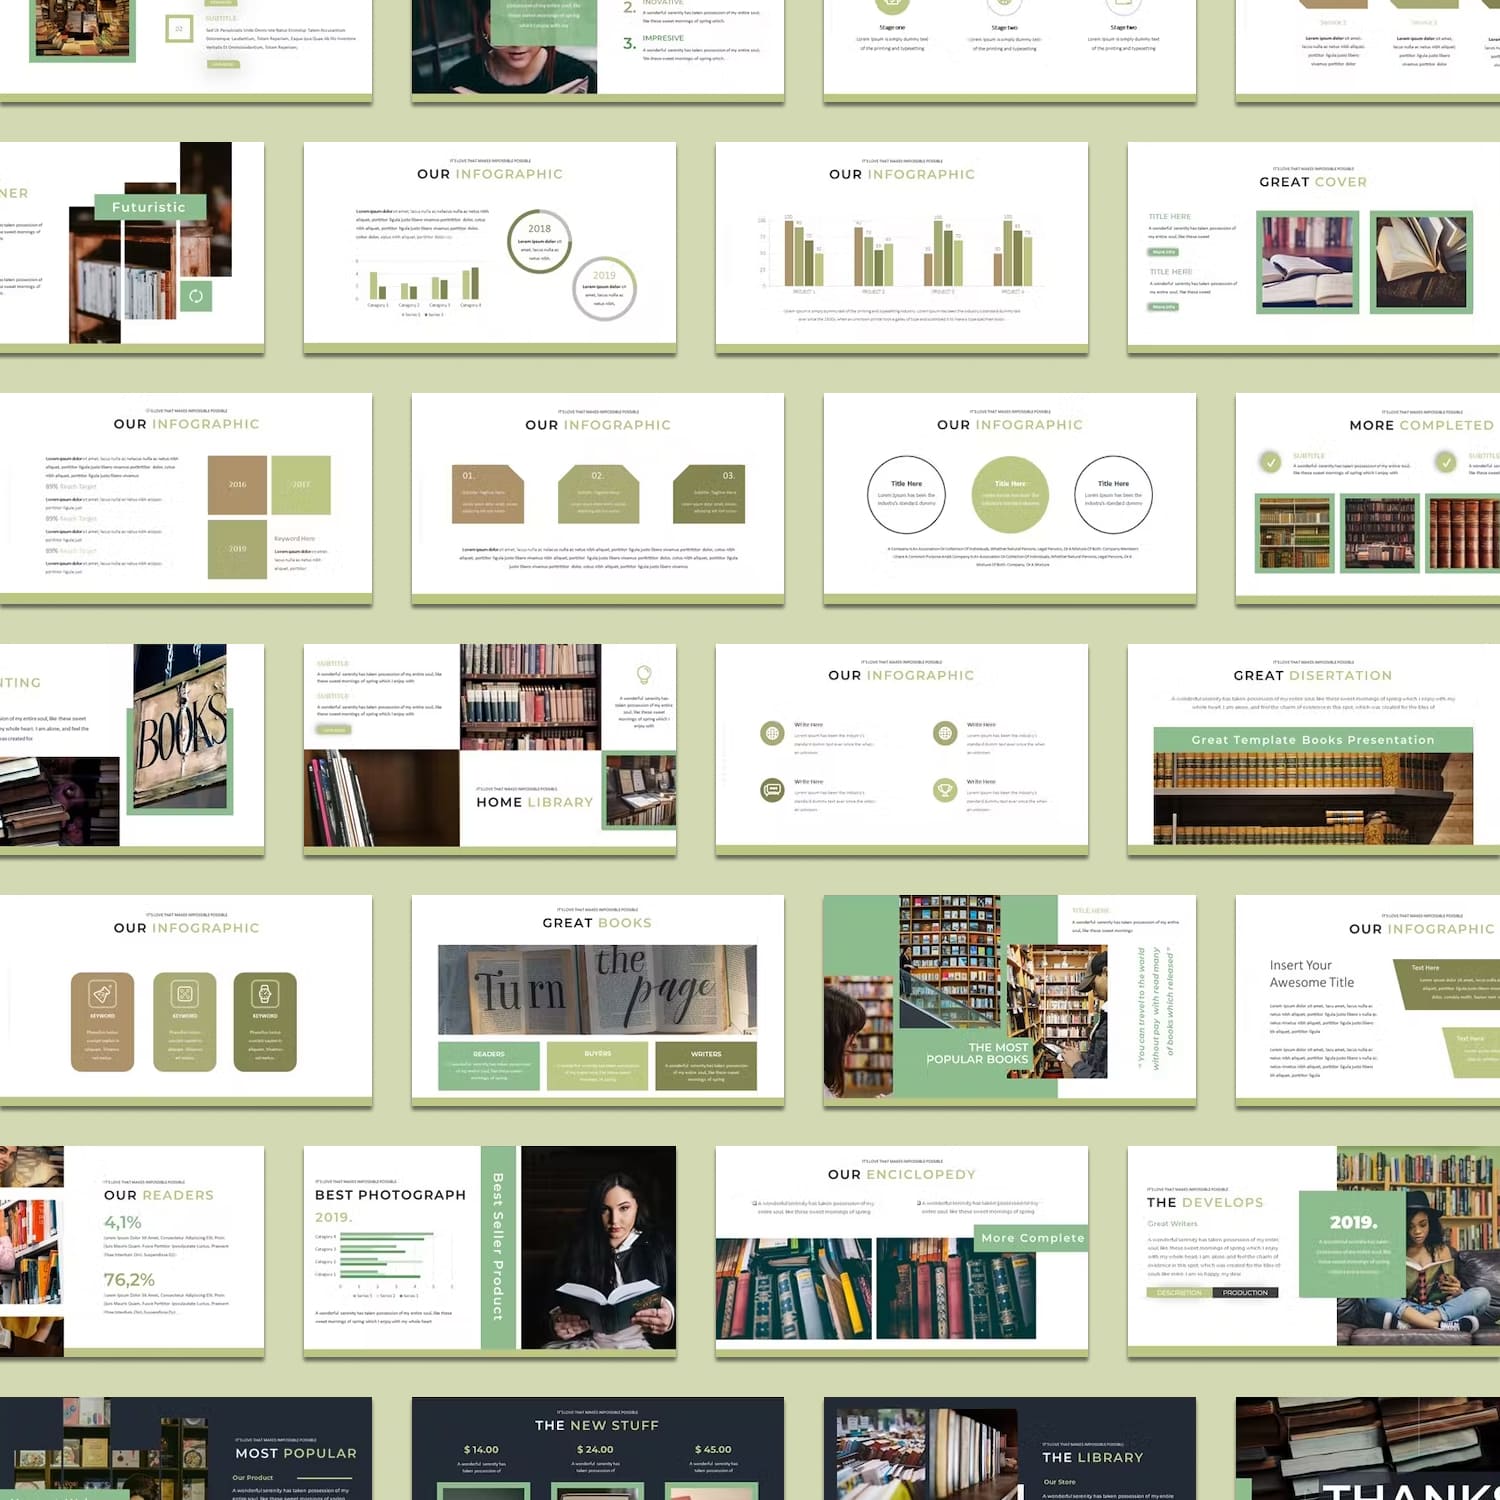 Book powerpoint template from aqrstudio.